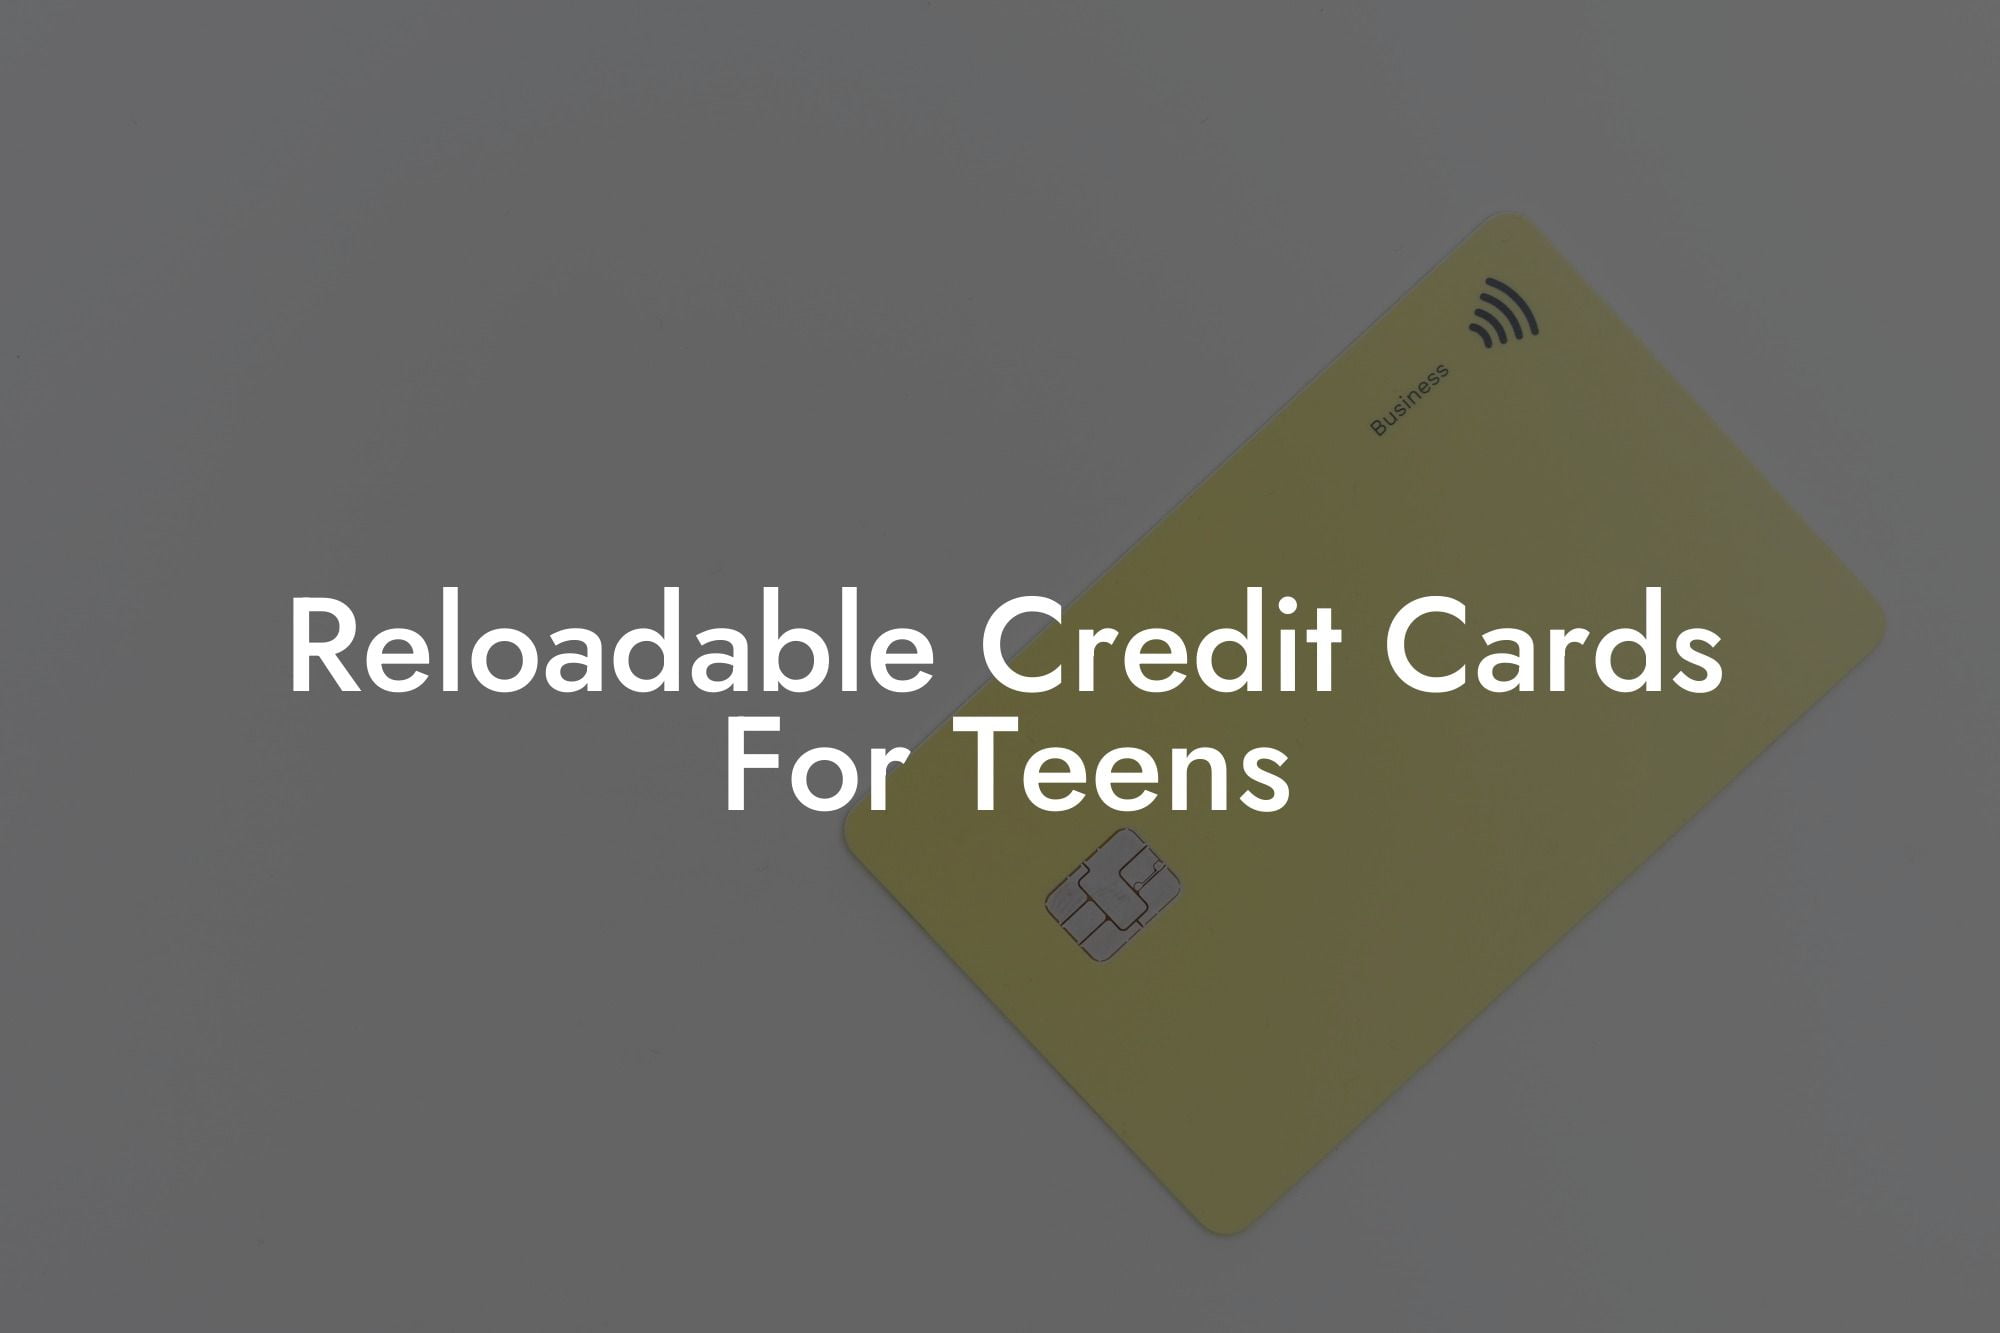 Reloadable Credit Cards For Teens